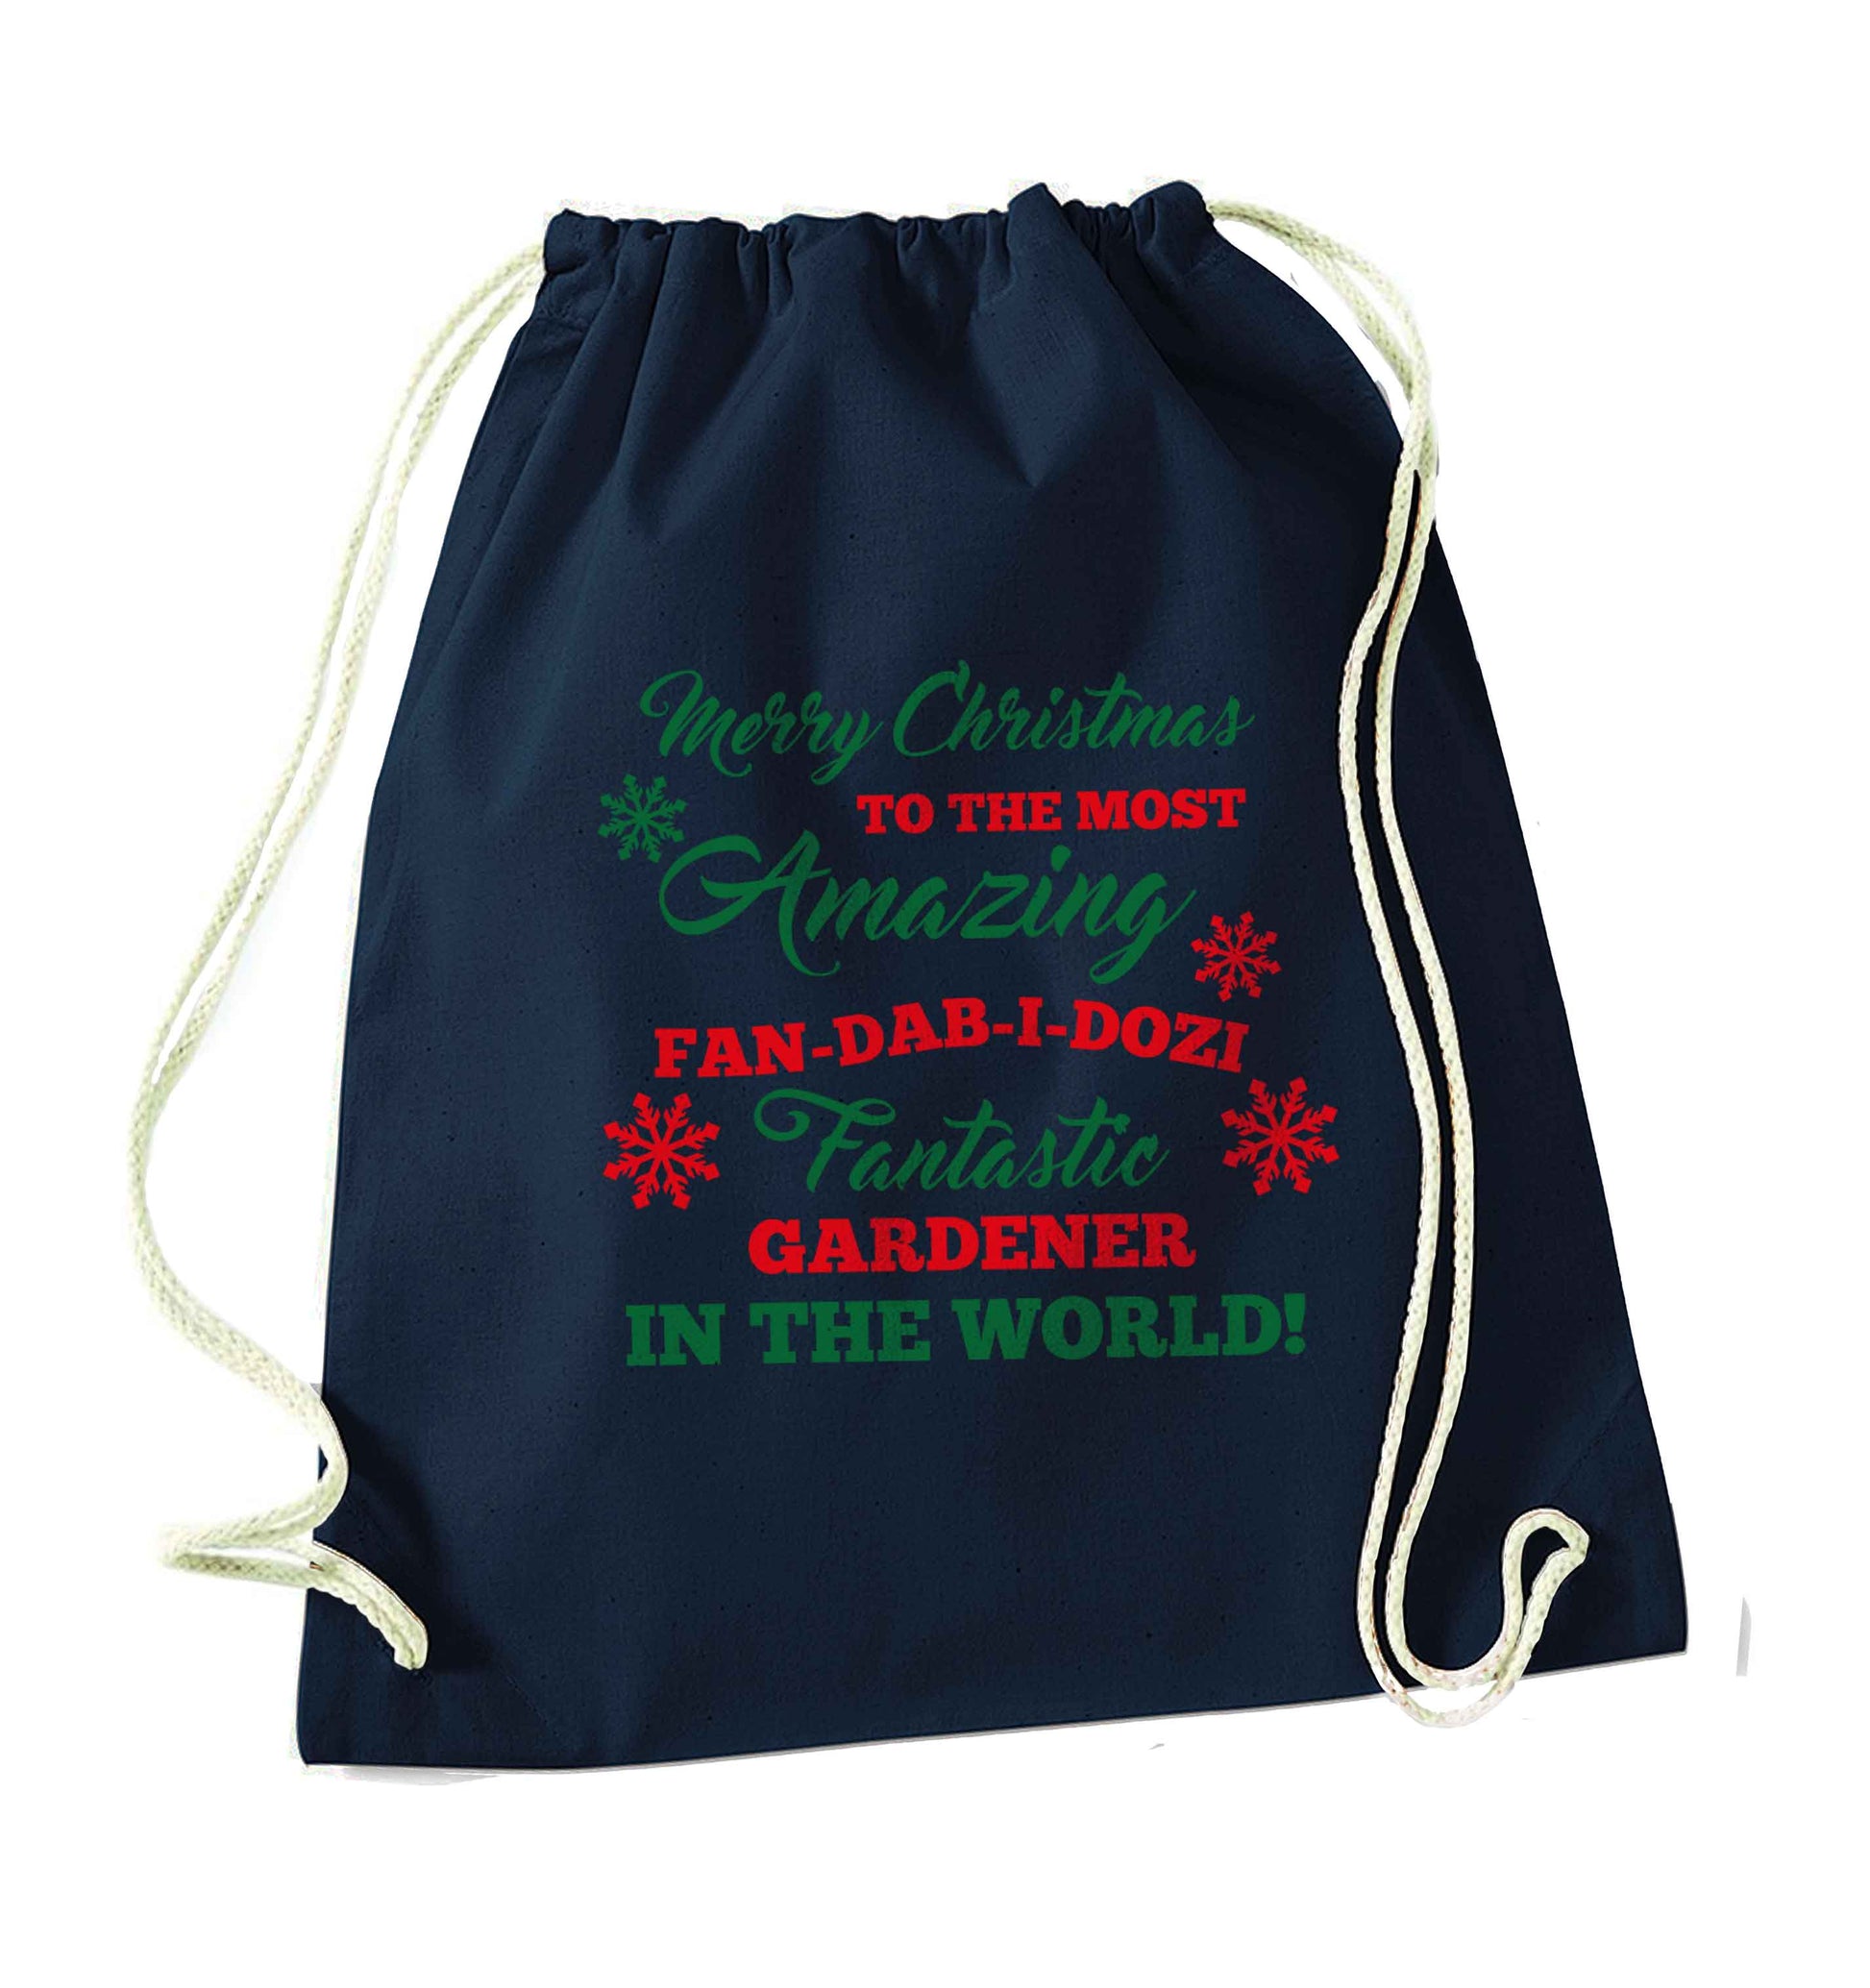 Merry Christmas to the most amazing gardener in the world! navy drawstring bag